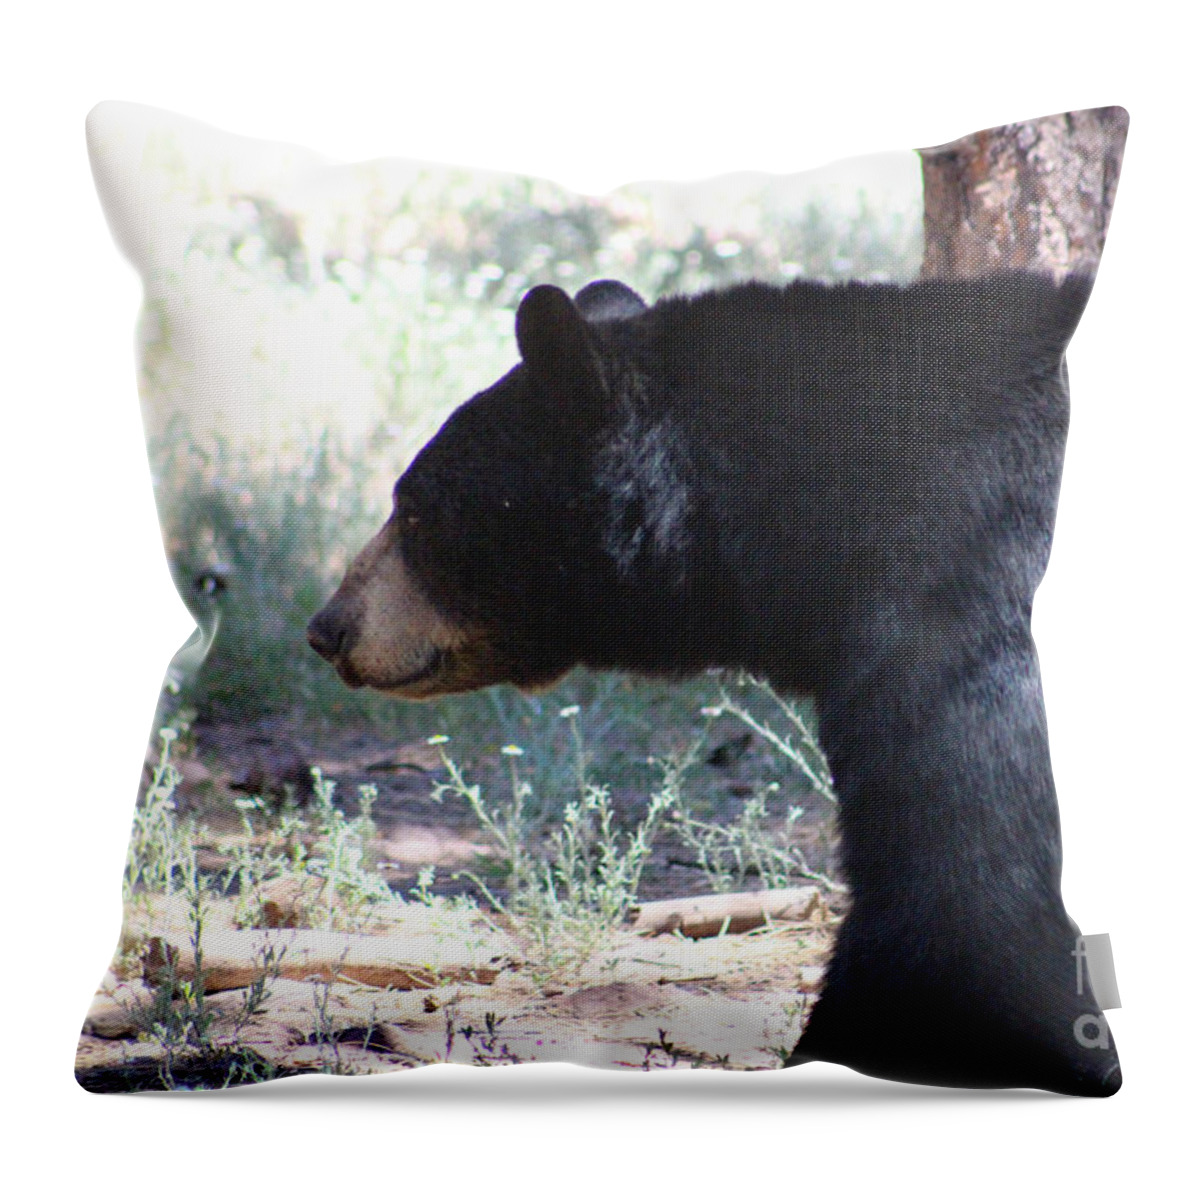 Black Bear Throw Pillow featuring the photograph Bear in Thought by Colleen Cornelius